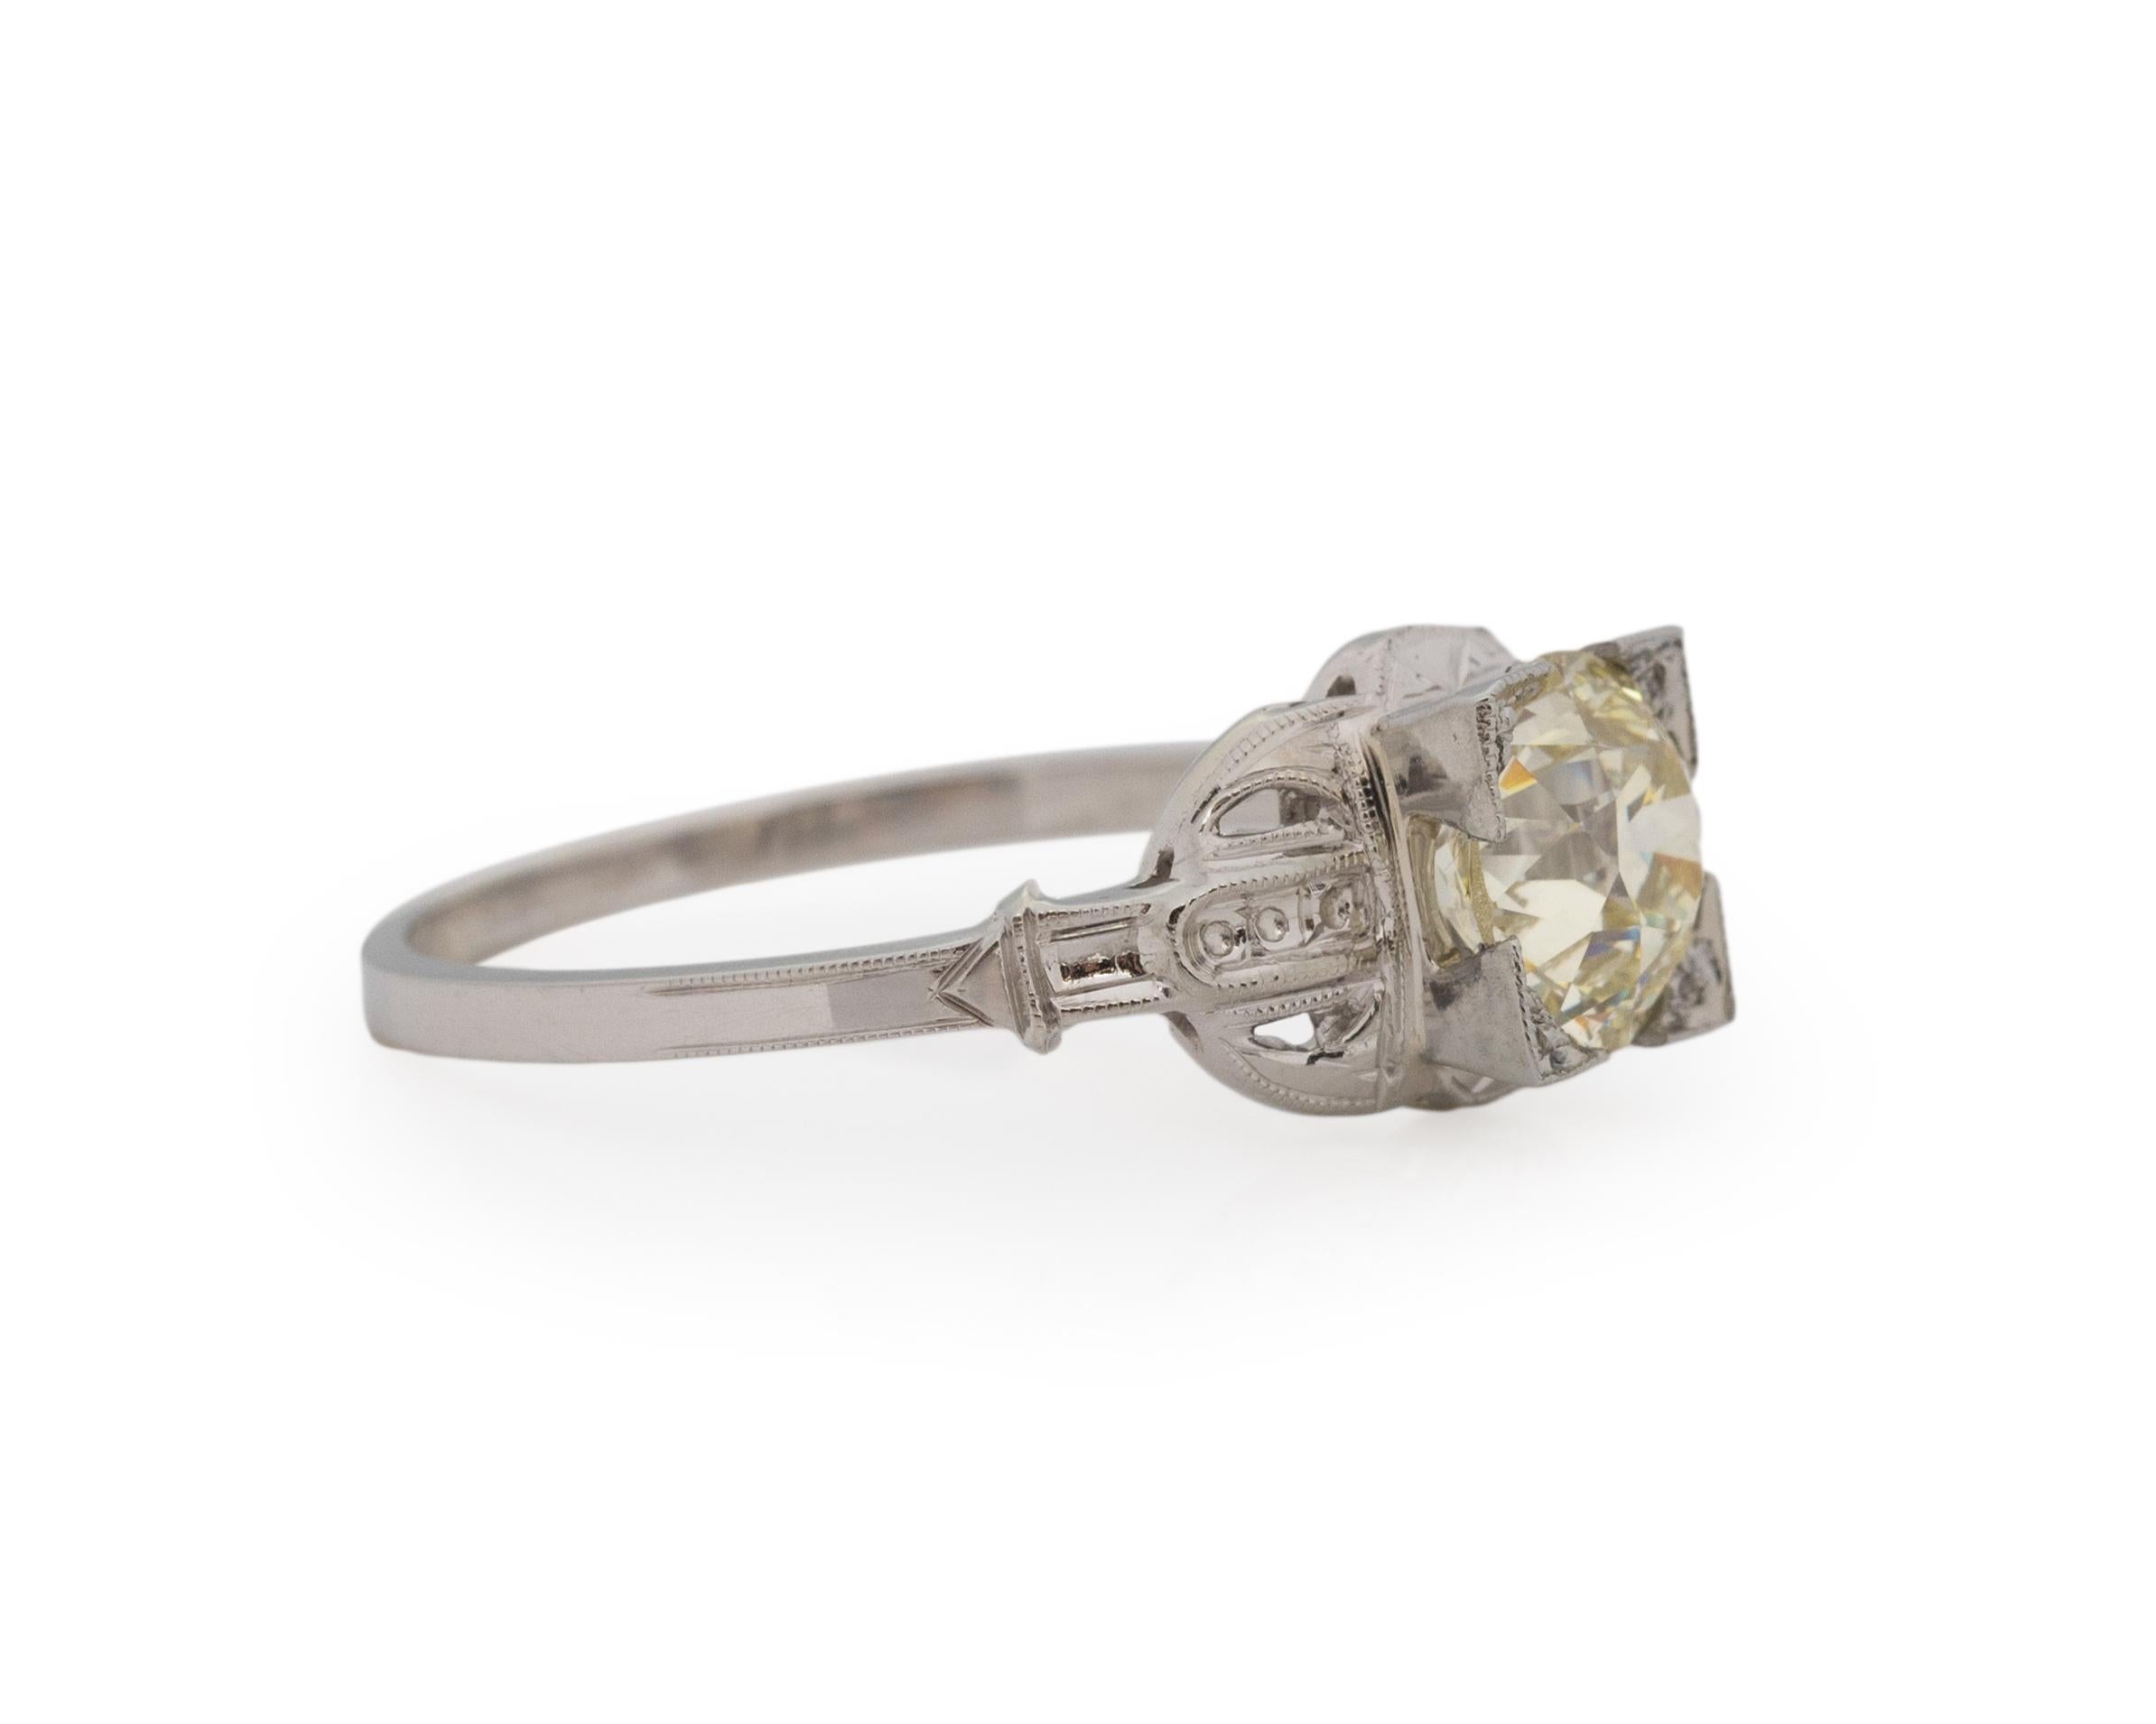 Ring Size: 7.75
Metal Type: 18k White Gold [Hallmarked, and Tested]
Weight: 2.5 grams

Center Diamond Details:
Weight: 1.40ct
Cut: Old European brilliant
Color: O/P (Light Yellow)
Clarity: VS1

Finger to Top of Stone Measurement: mm
Condition: